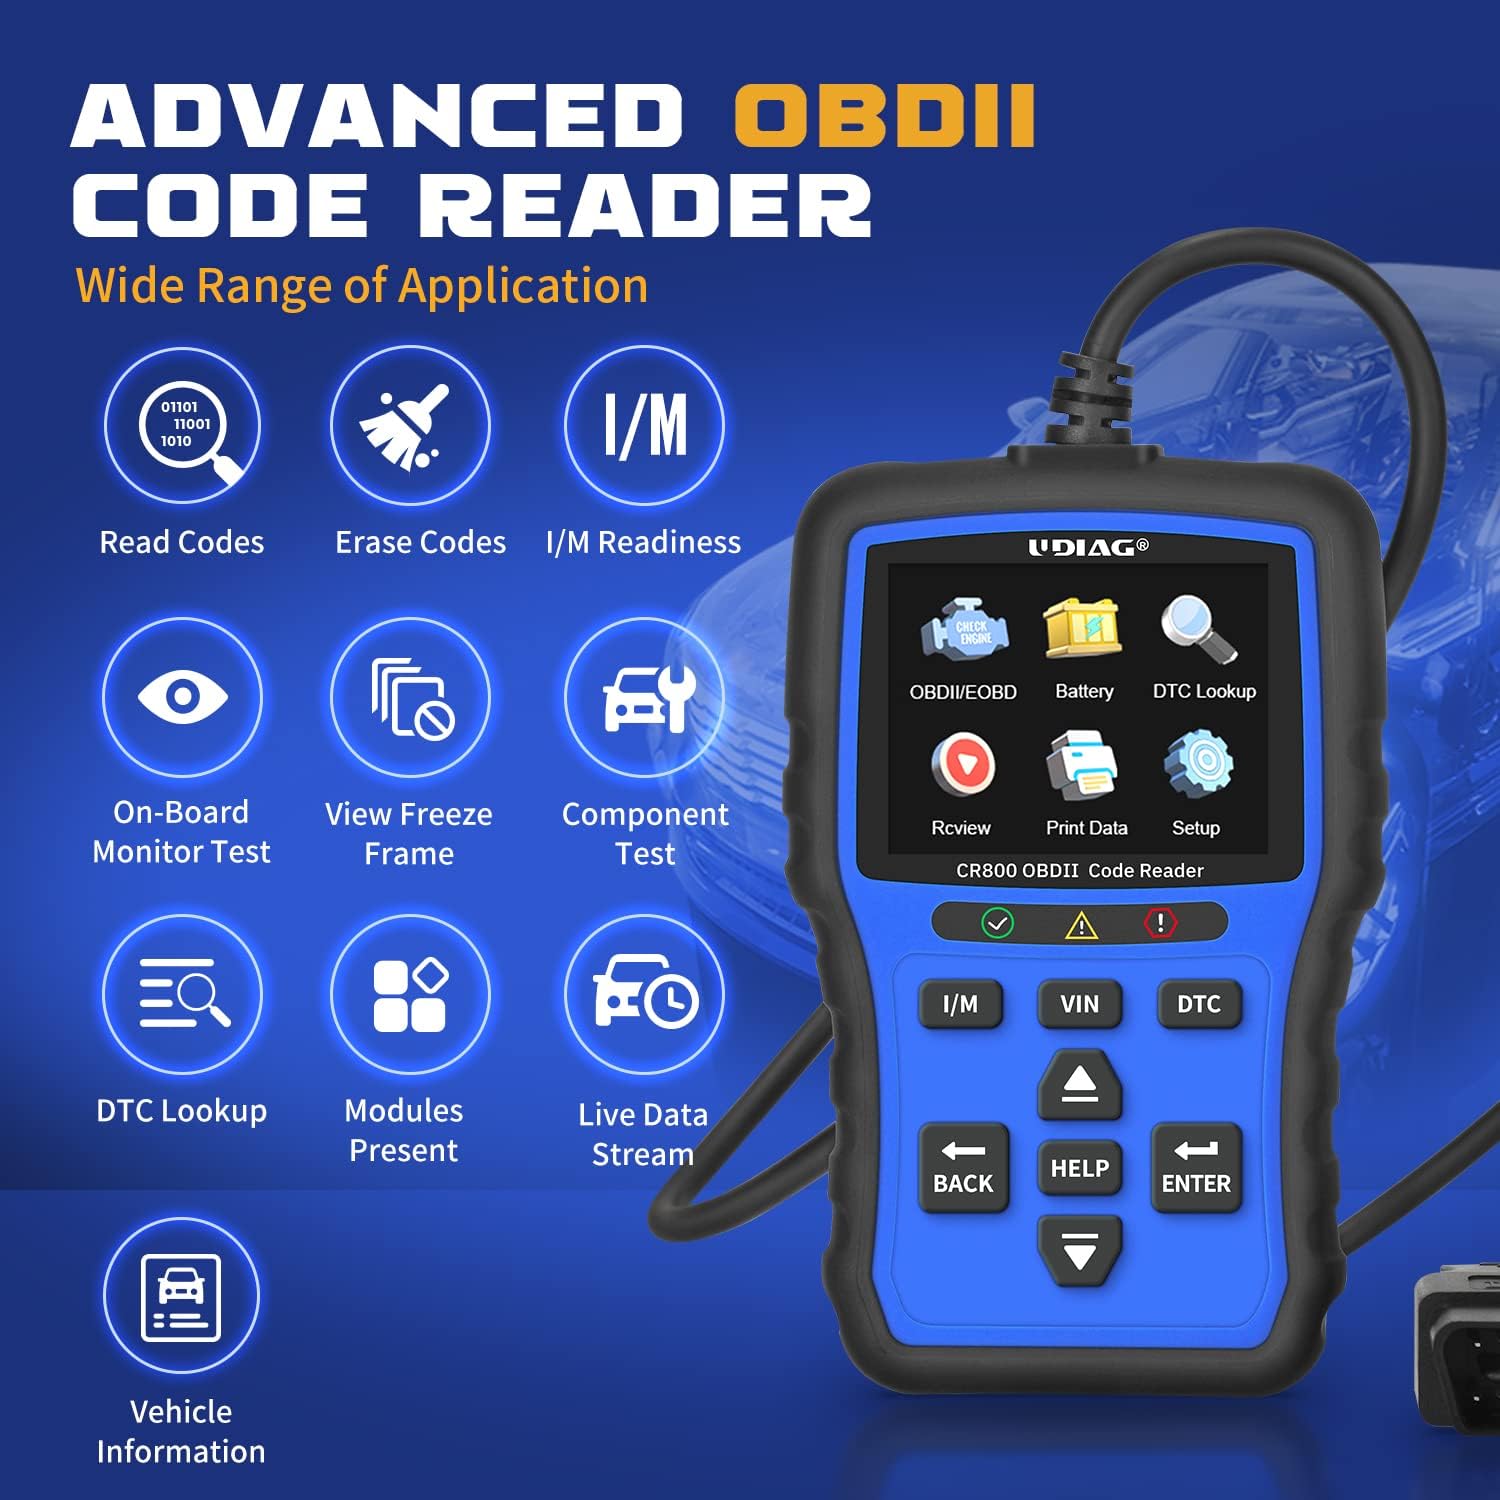 KINGBOLEN OBD2 Scanner,Code Reader Automotive Engine Light Check Scan Tool  Checks O2 Sensor and EVAP Systems with Full OBD2 Functions,Supports Mode6